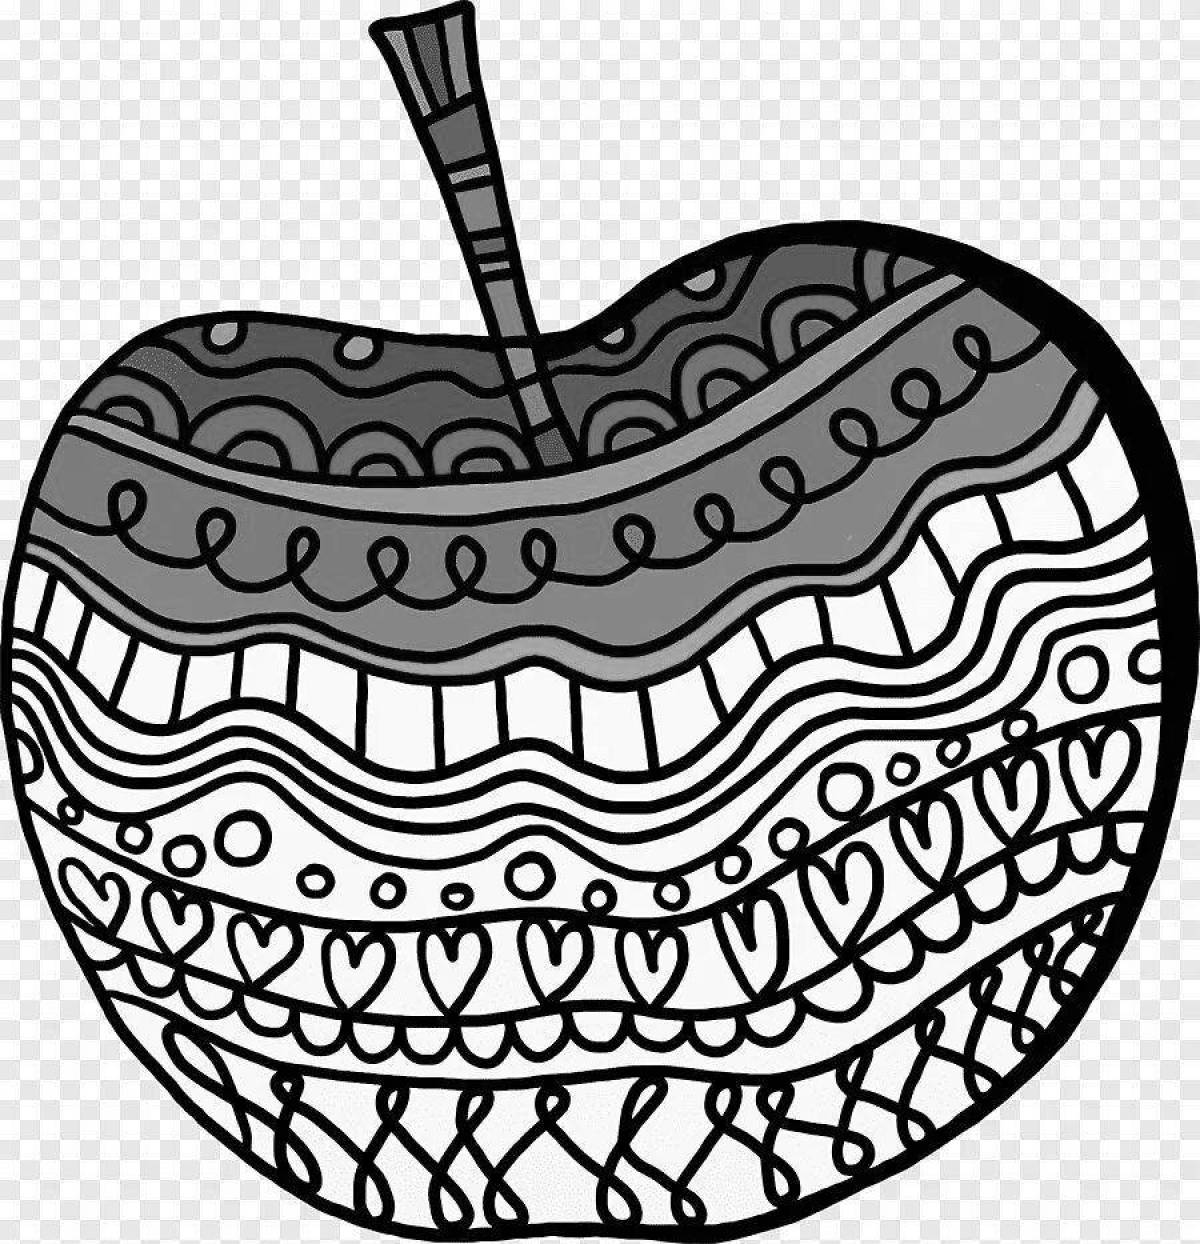 Apple soothing anti-stress coloring book